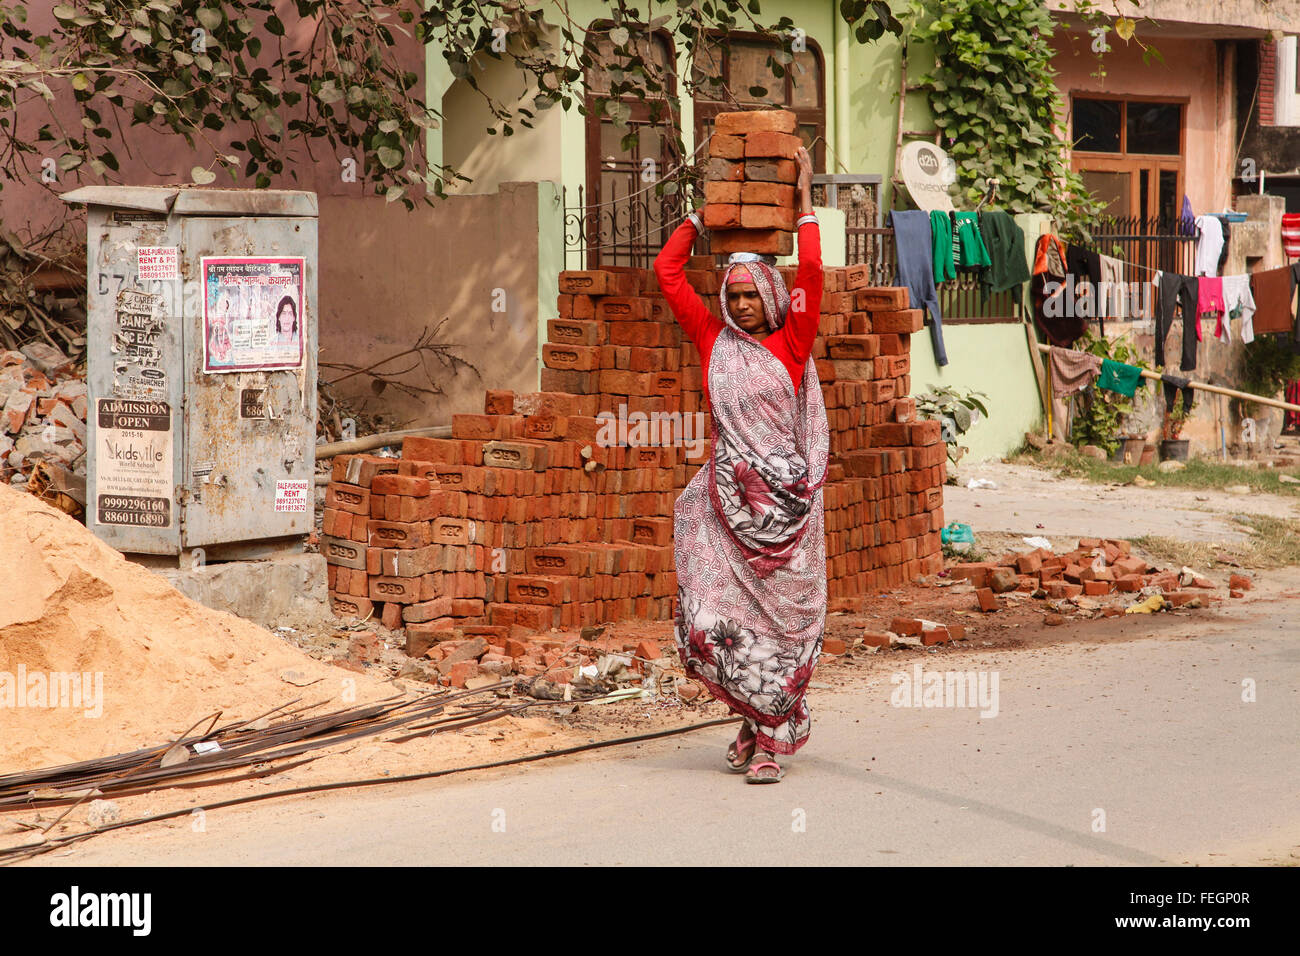 India's illiterate women working as laborers using their hands. Stock Photo